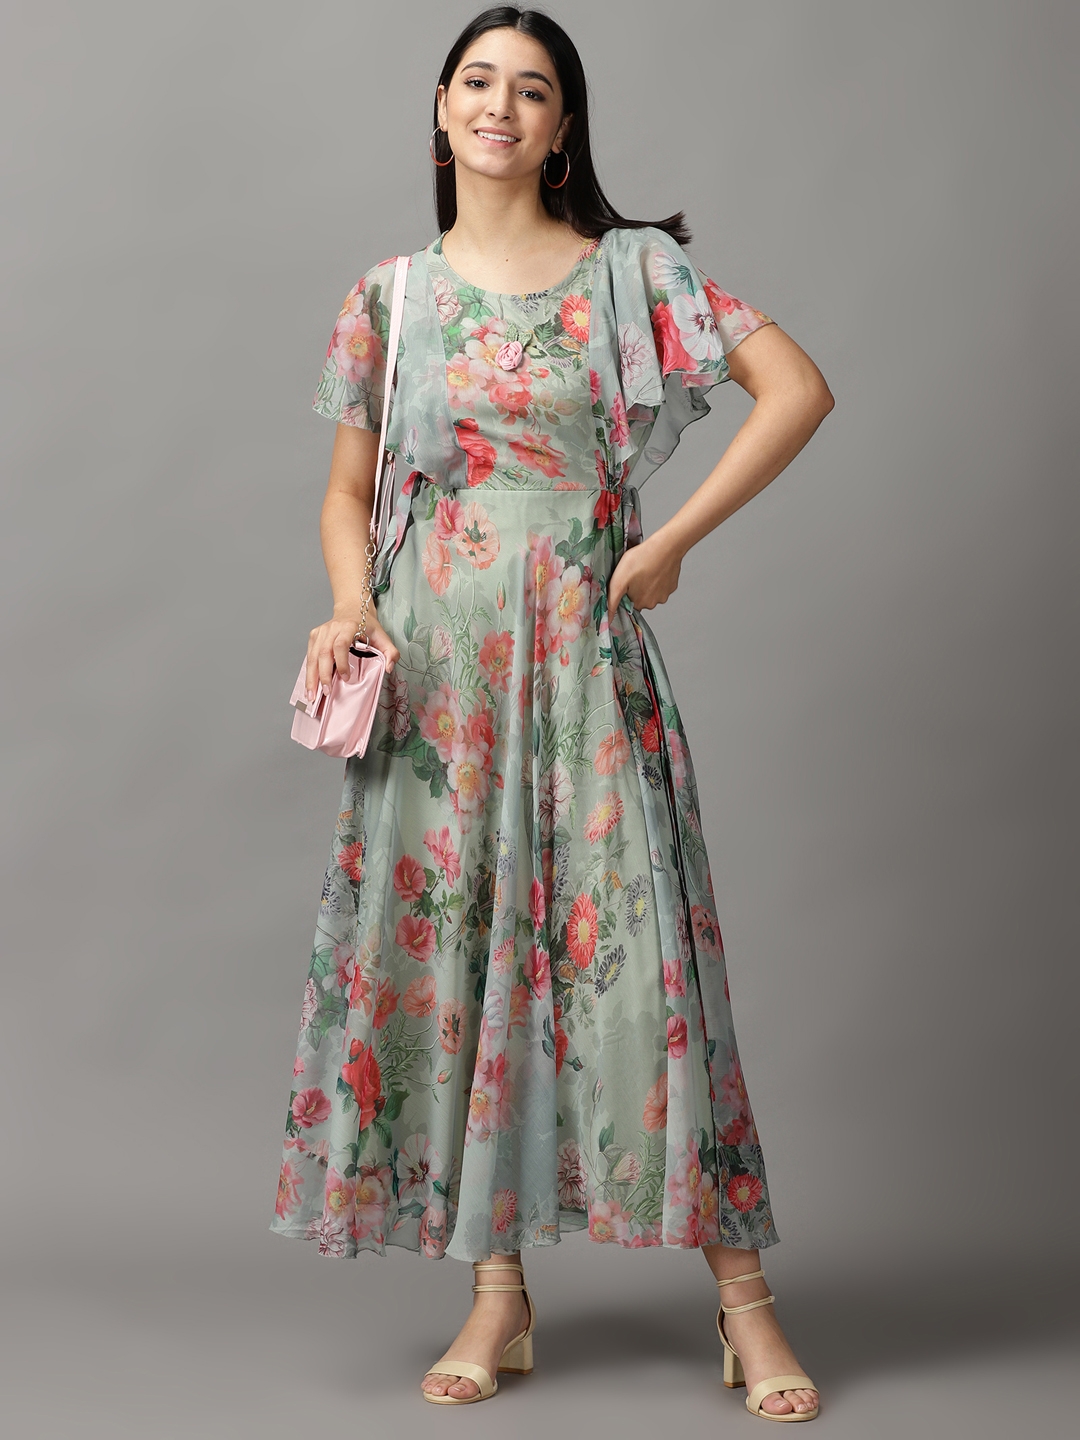 Women's Green Polyester Floral Dresses